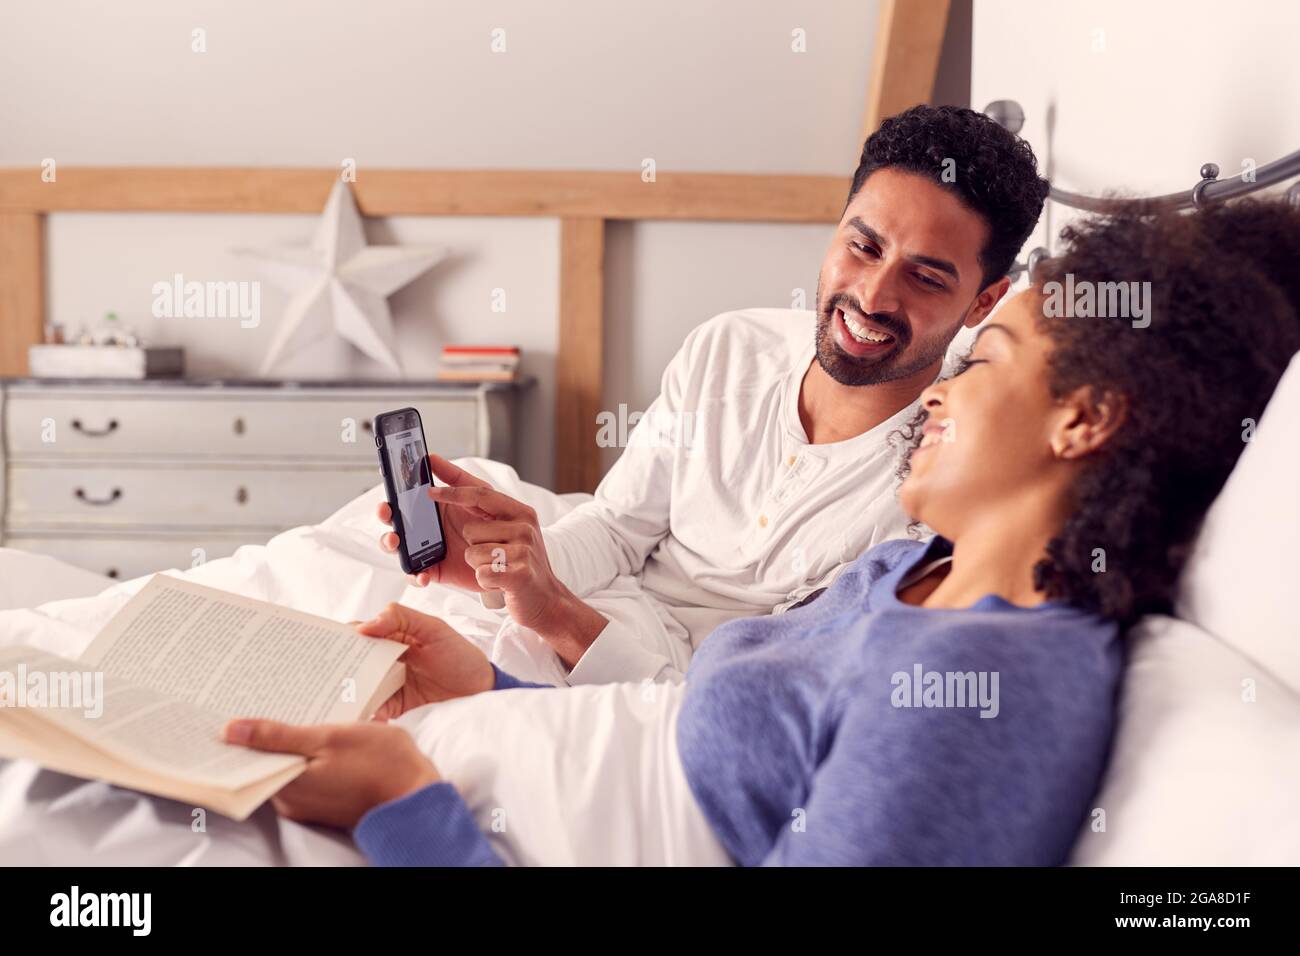 Couple In Bed Reading And Looking At Photos On Mobile Phone Together Stock Photo